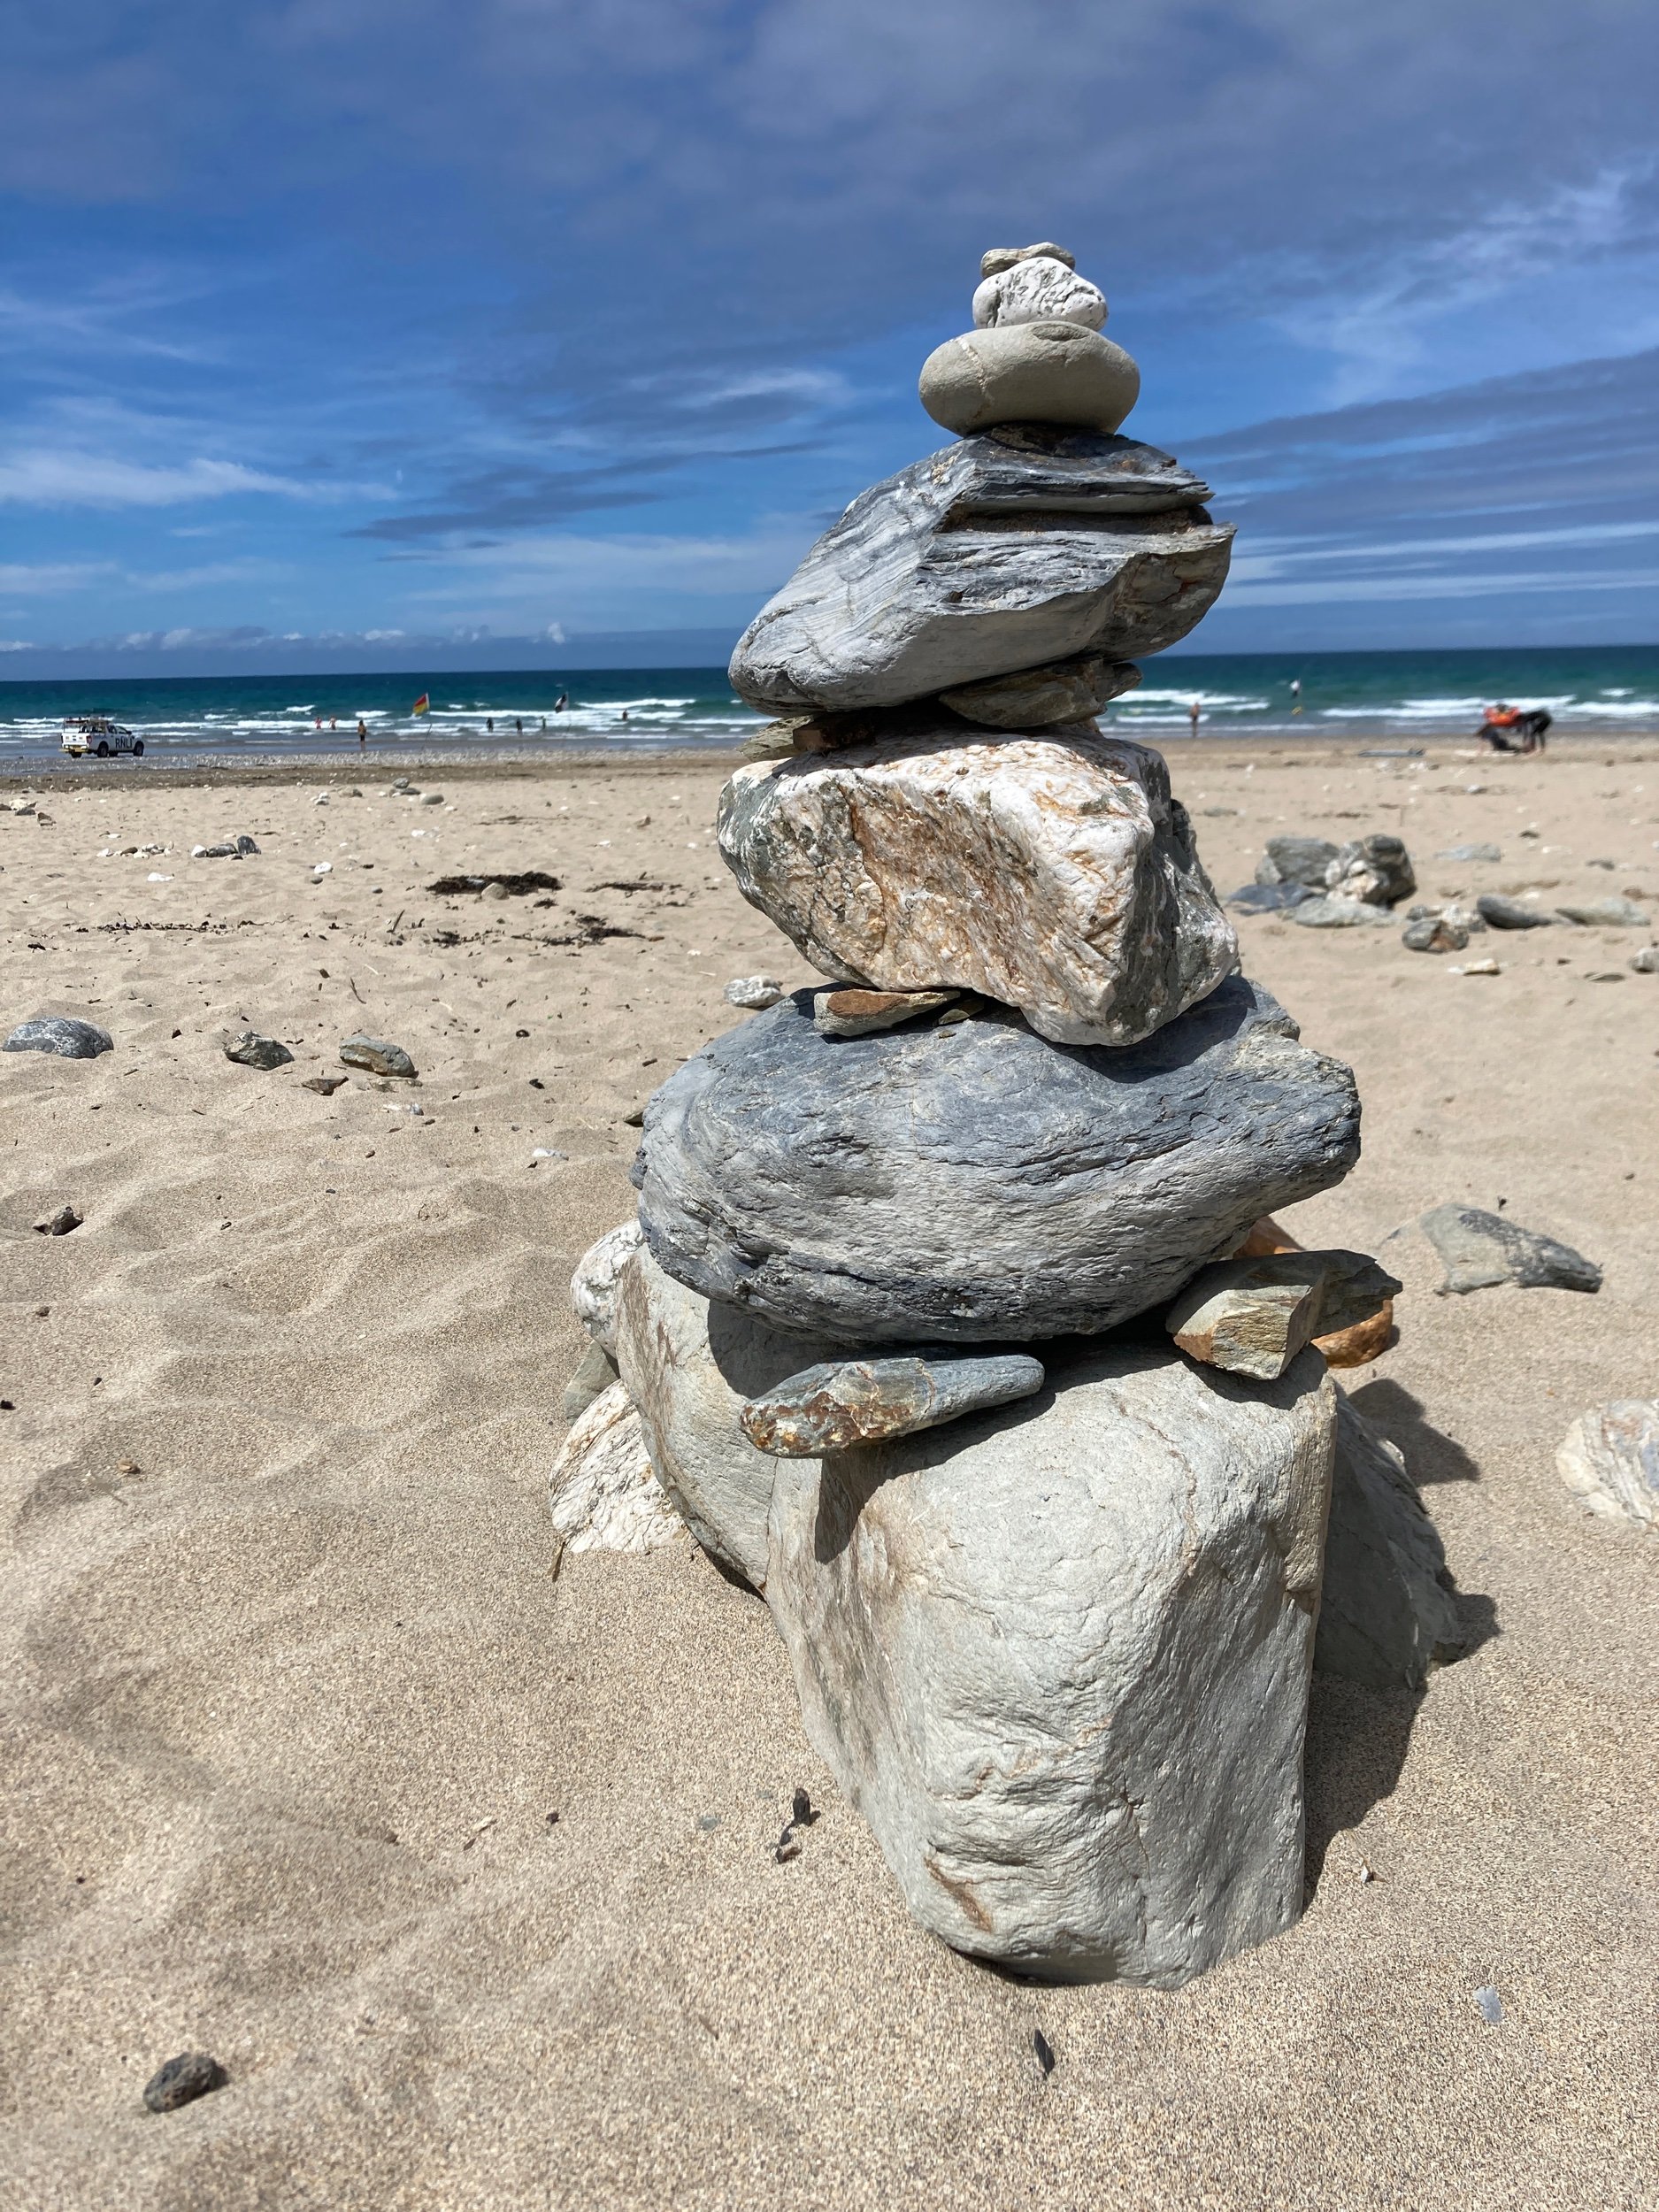 Pebbles stacked up on a beach to create a structure. The sand is soft, the sky is blue and there is an imperfection to the structure that makes it look different to a regular image of pebbles balancing.